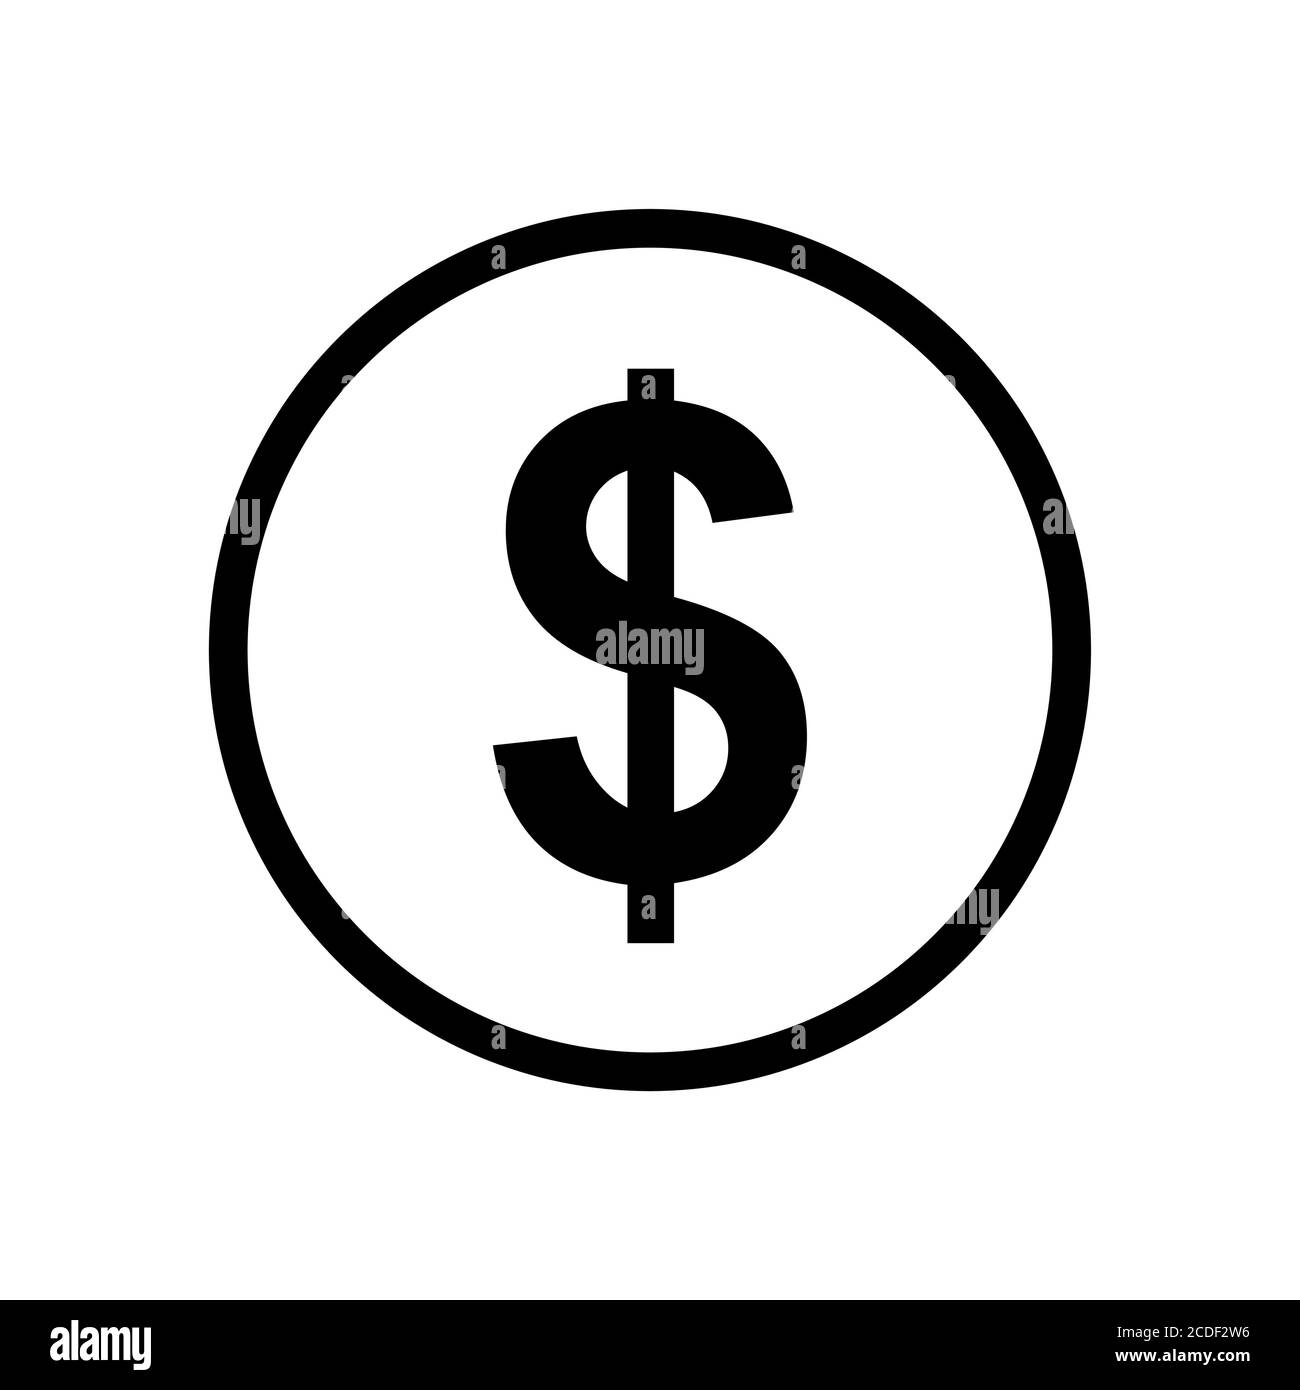 Dollar coin monochrome black and white icon. Current currency symbol. Stock Vector